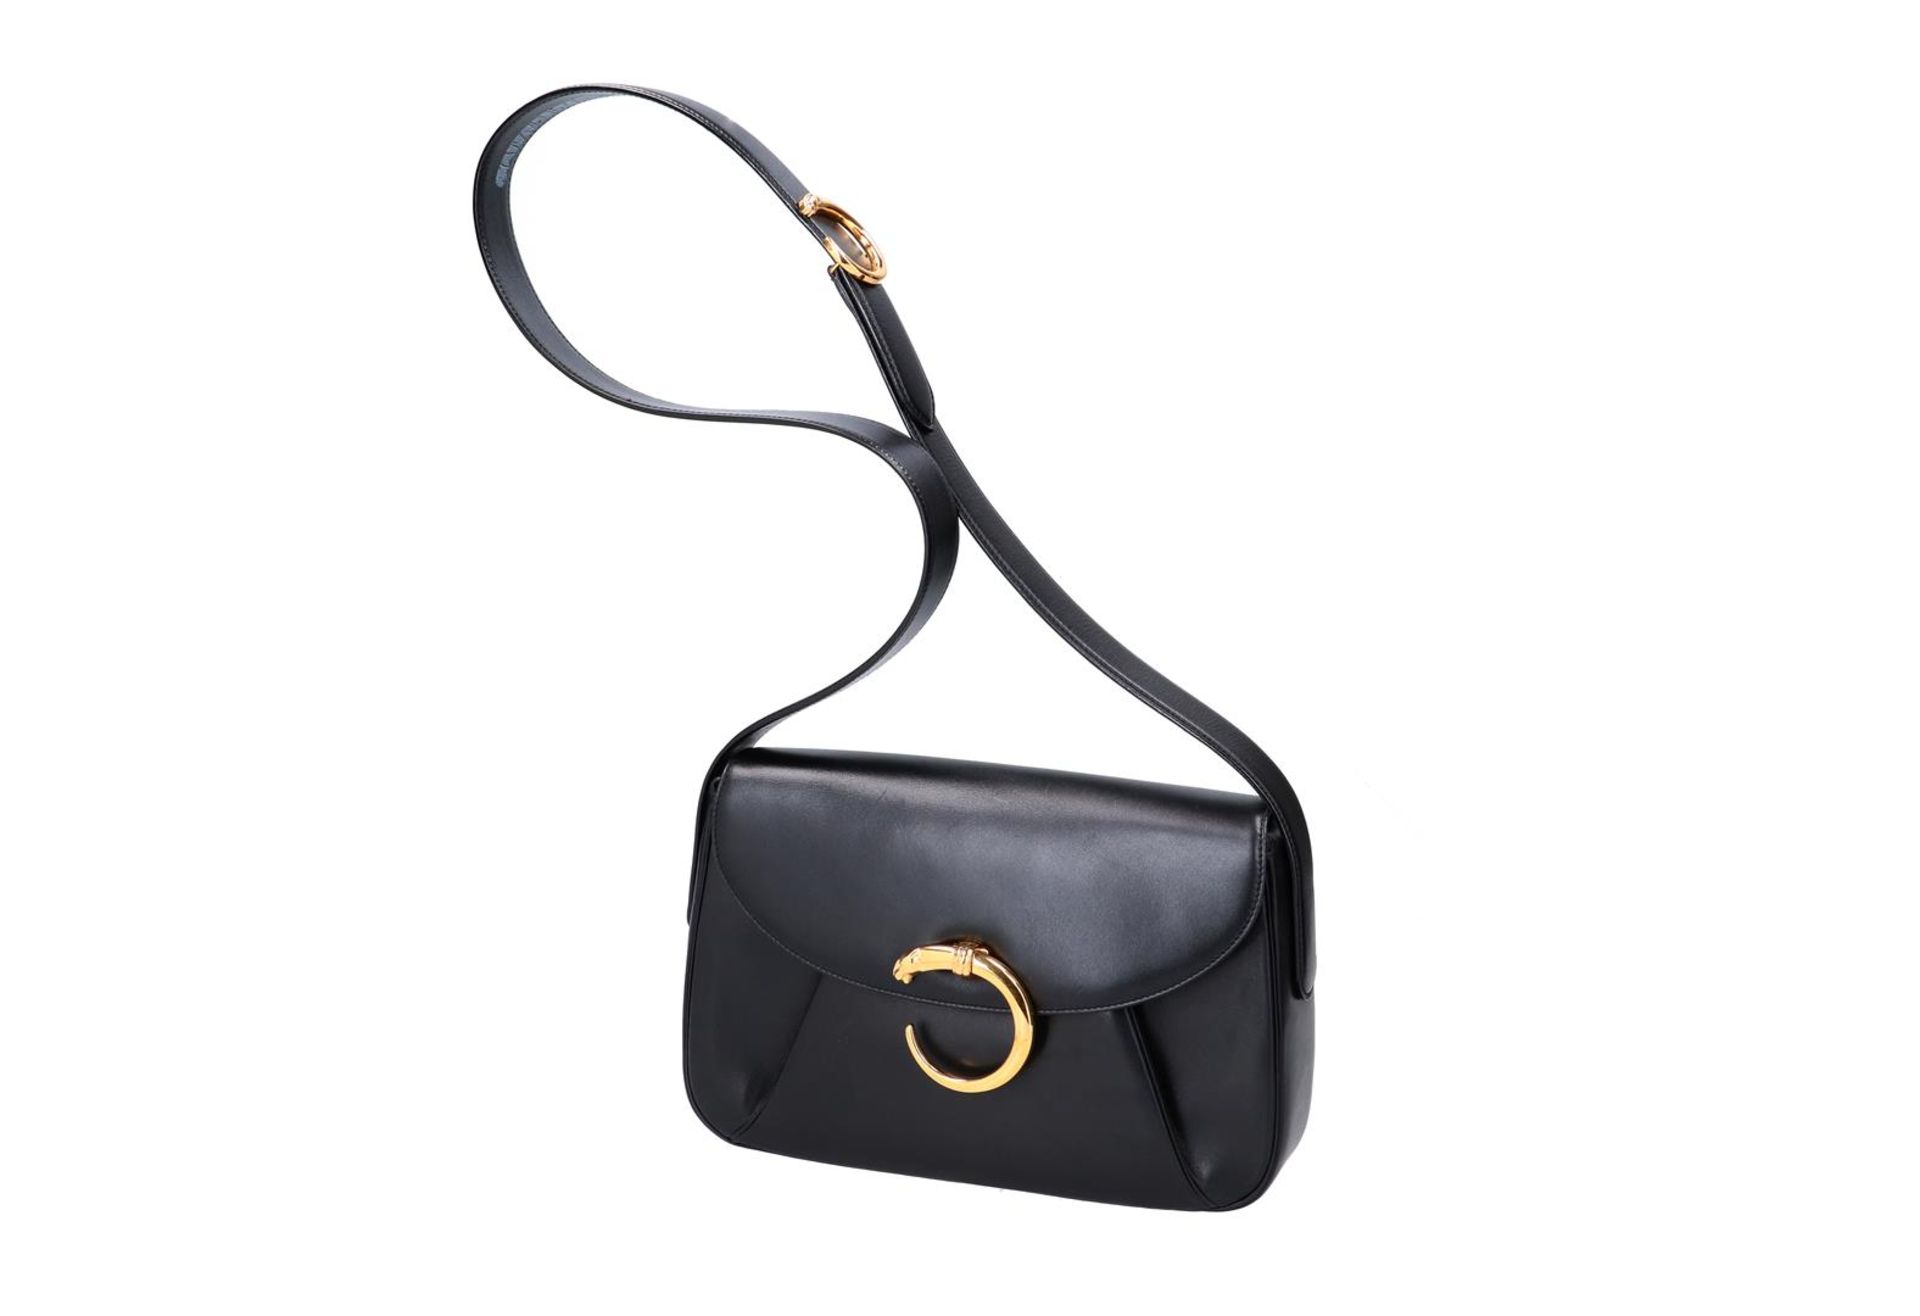 Cartier, black leather handbag, 'Panthere', with red leather interior and wallet. H x W x D: 19 x 28